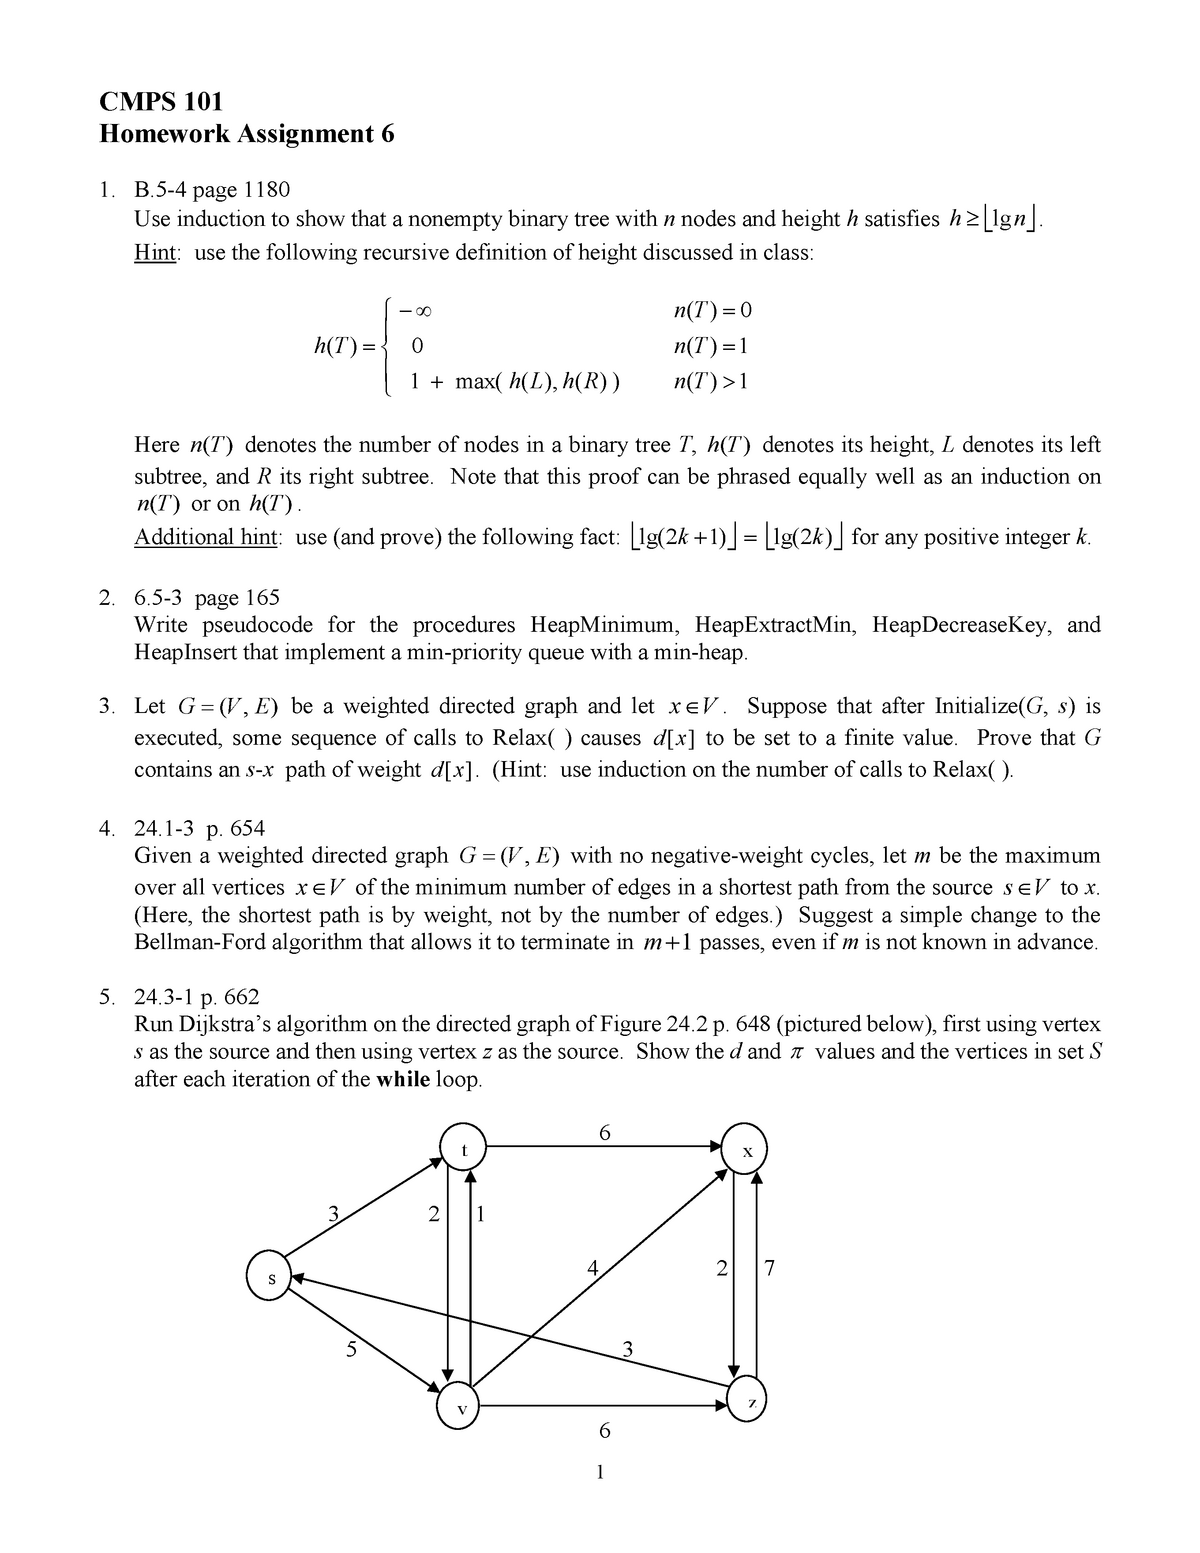 Hw6 Hw6 Cmps 101 Homework Assignment Page 1180 Use Induction To Show That Nonempty Binary Tree With Nodes And Height Satisfies Hint Use The Following Studocu